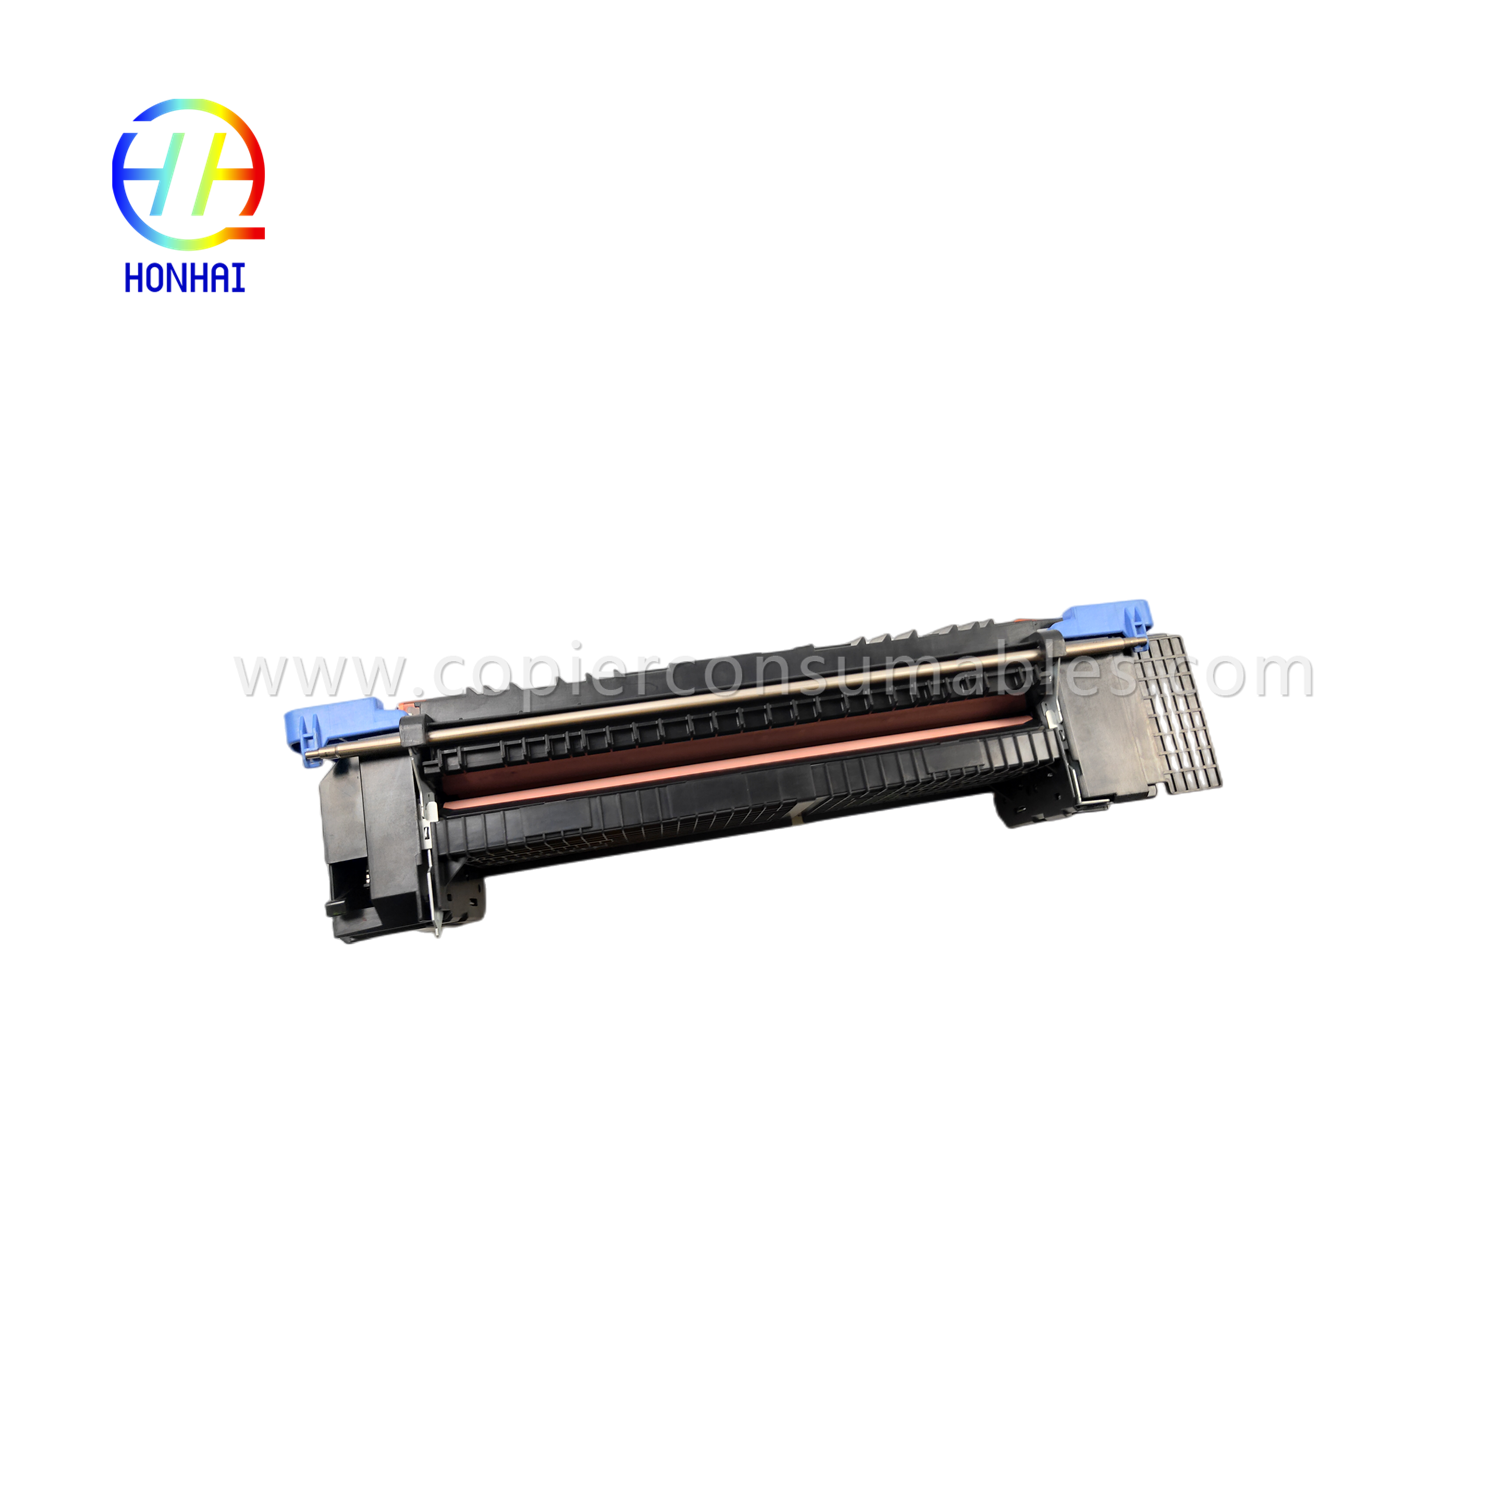 https://www.copierconsumables.com/fuser-assembly-unit-for-hp-m855-m880-m855dn-m855xh-m880z-m880z-c1n54-67901-c1n58-67901-fising-heating-fising-